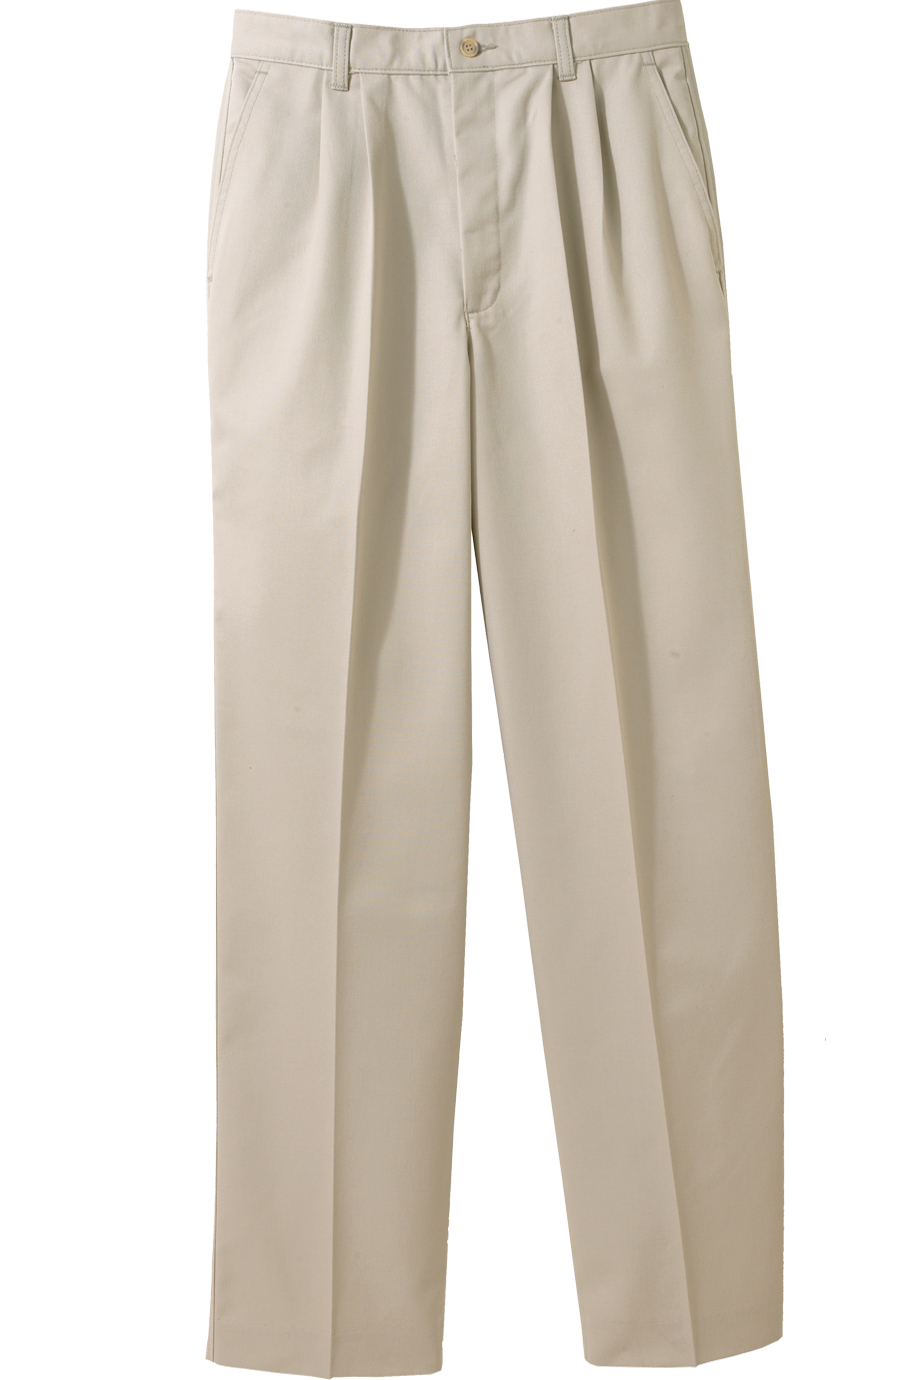 Edwards Big & Tall  Blended Chino Pleated Pant - Online Exclusive